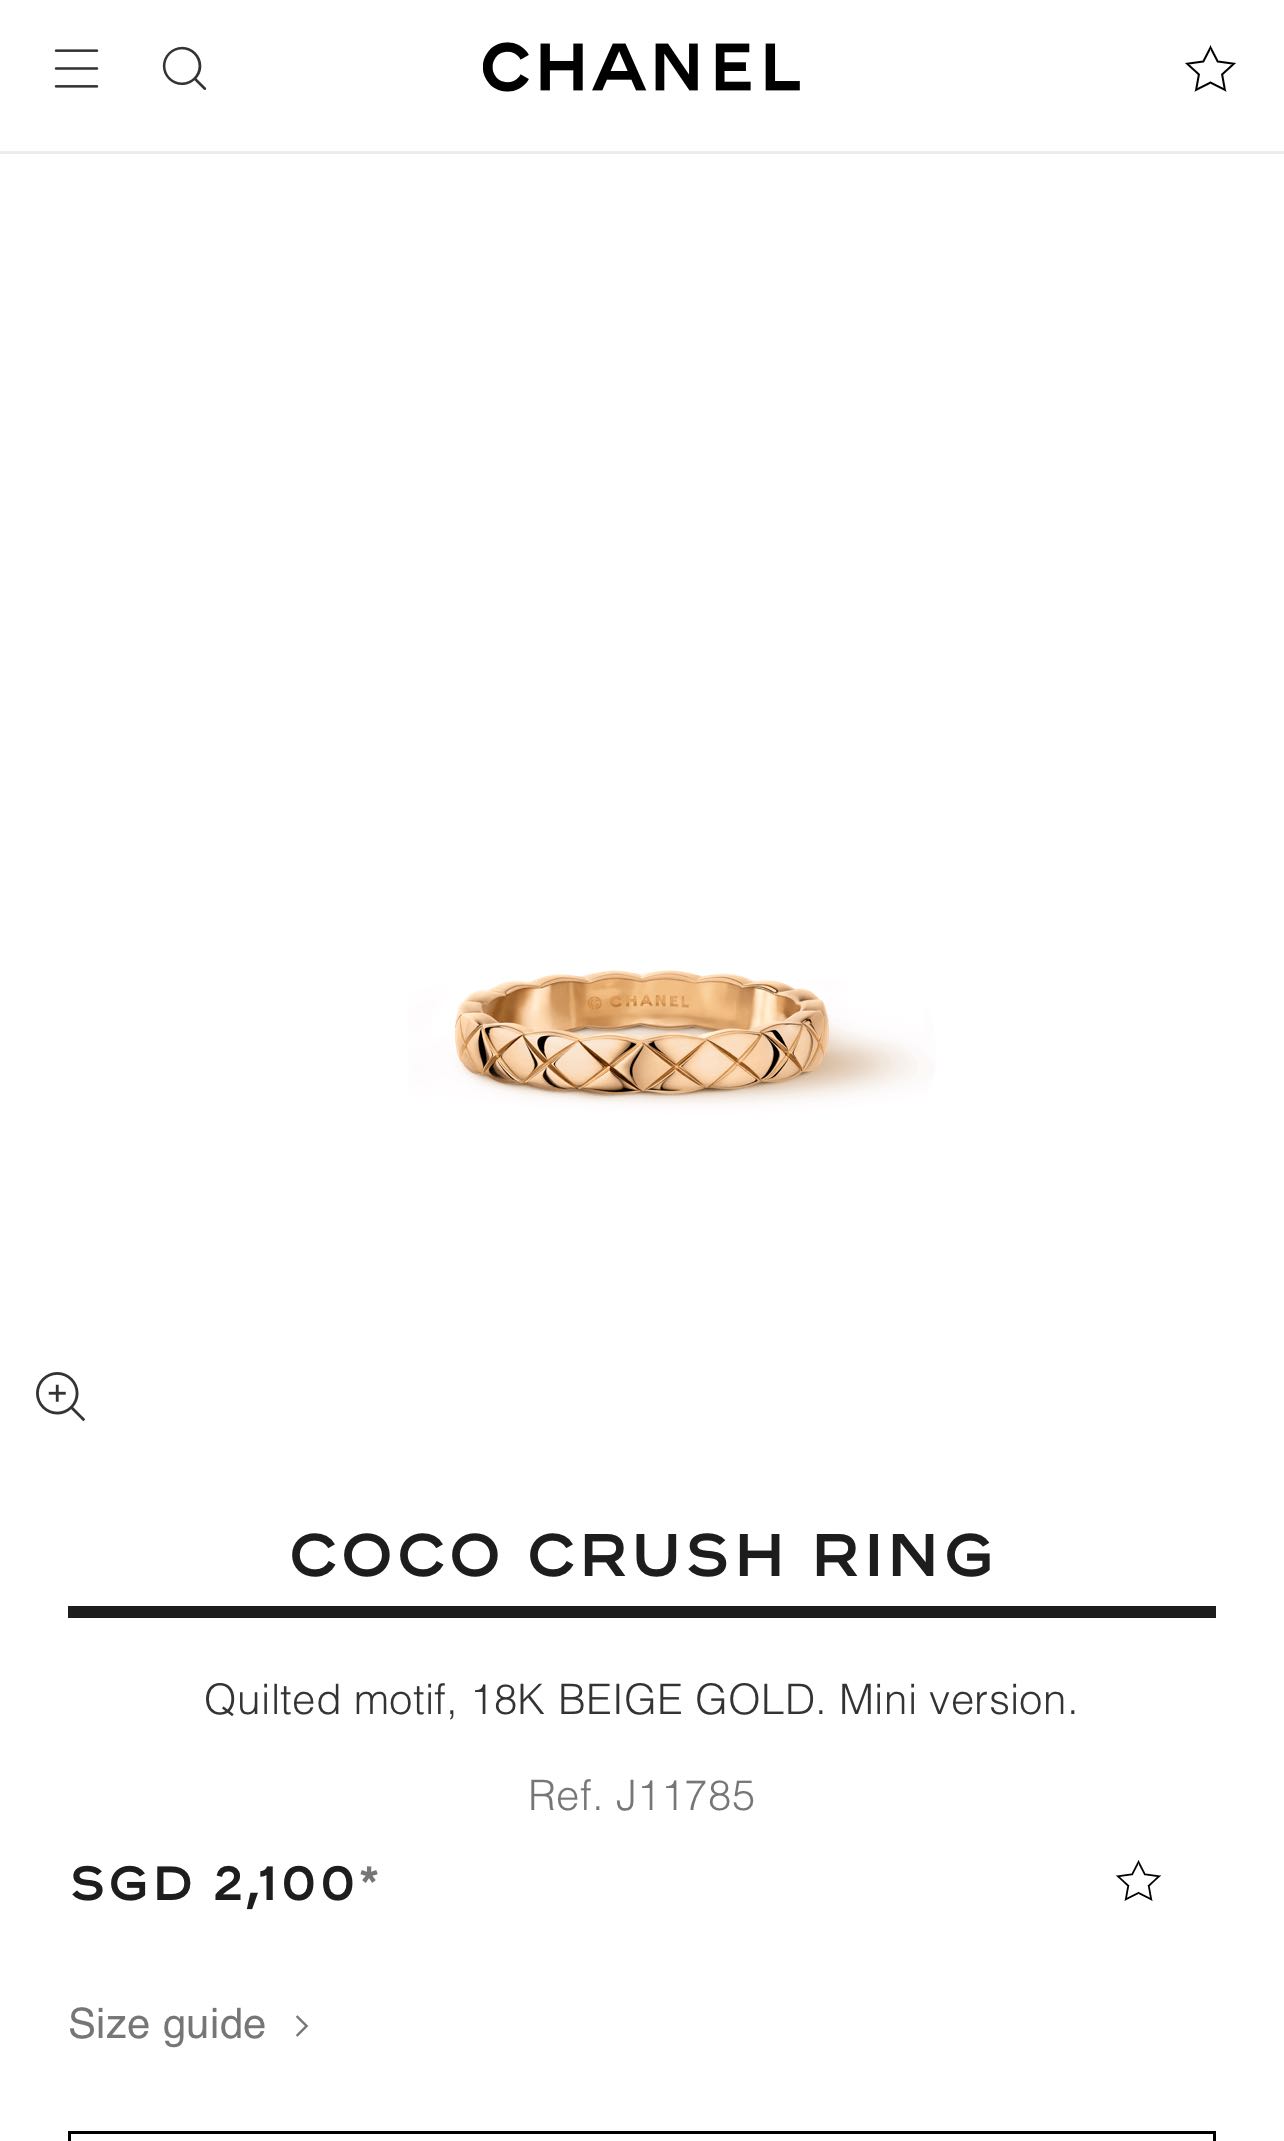 The Coco Crush Rings  CHANEL